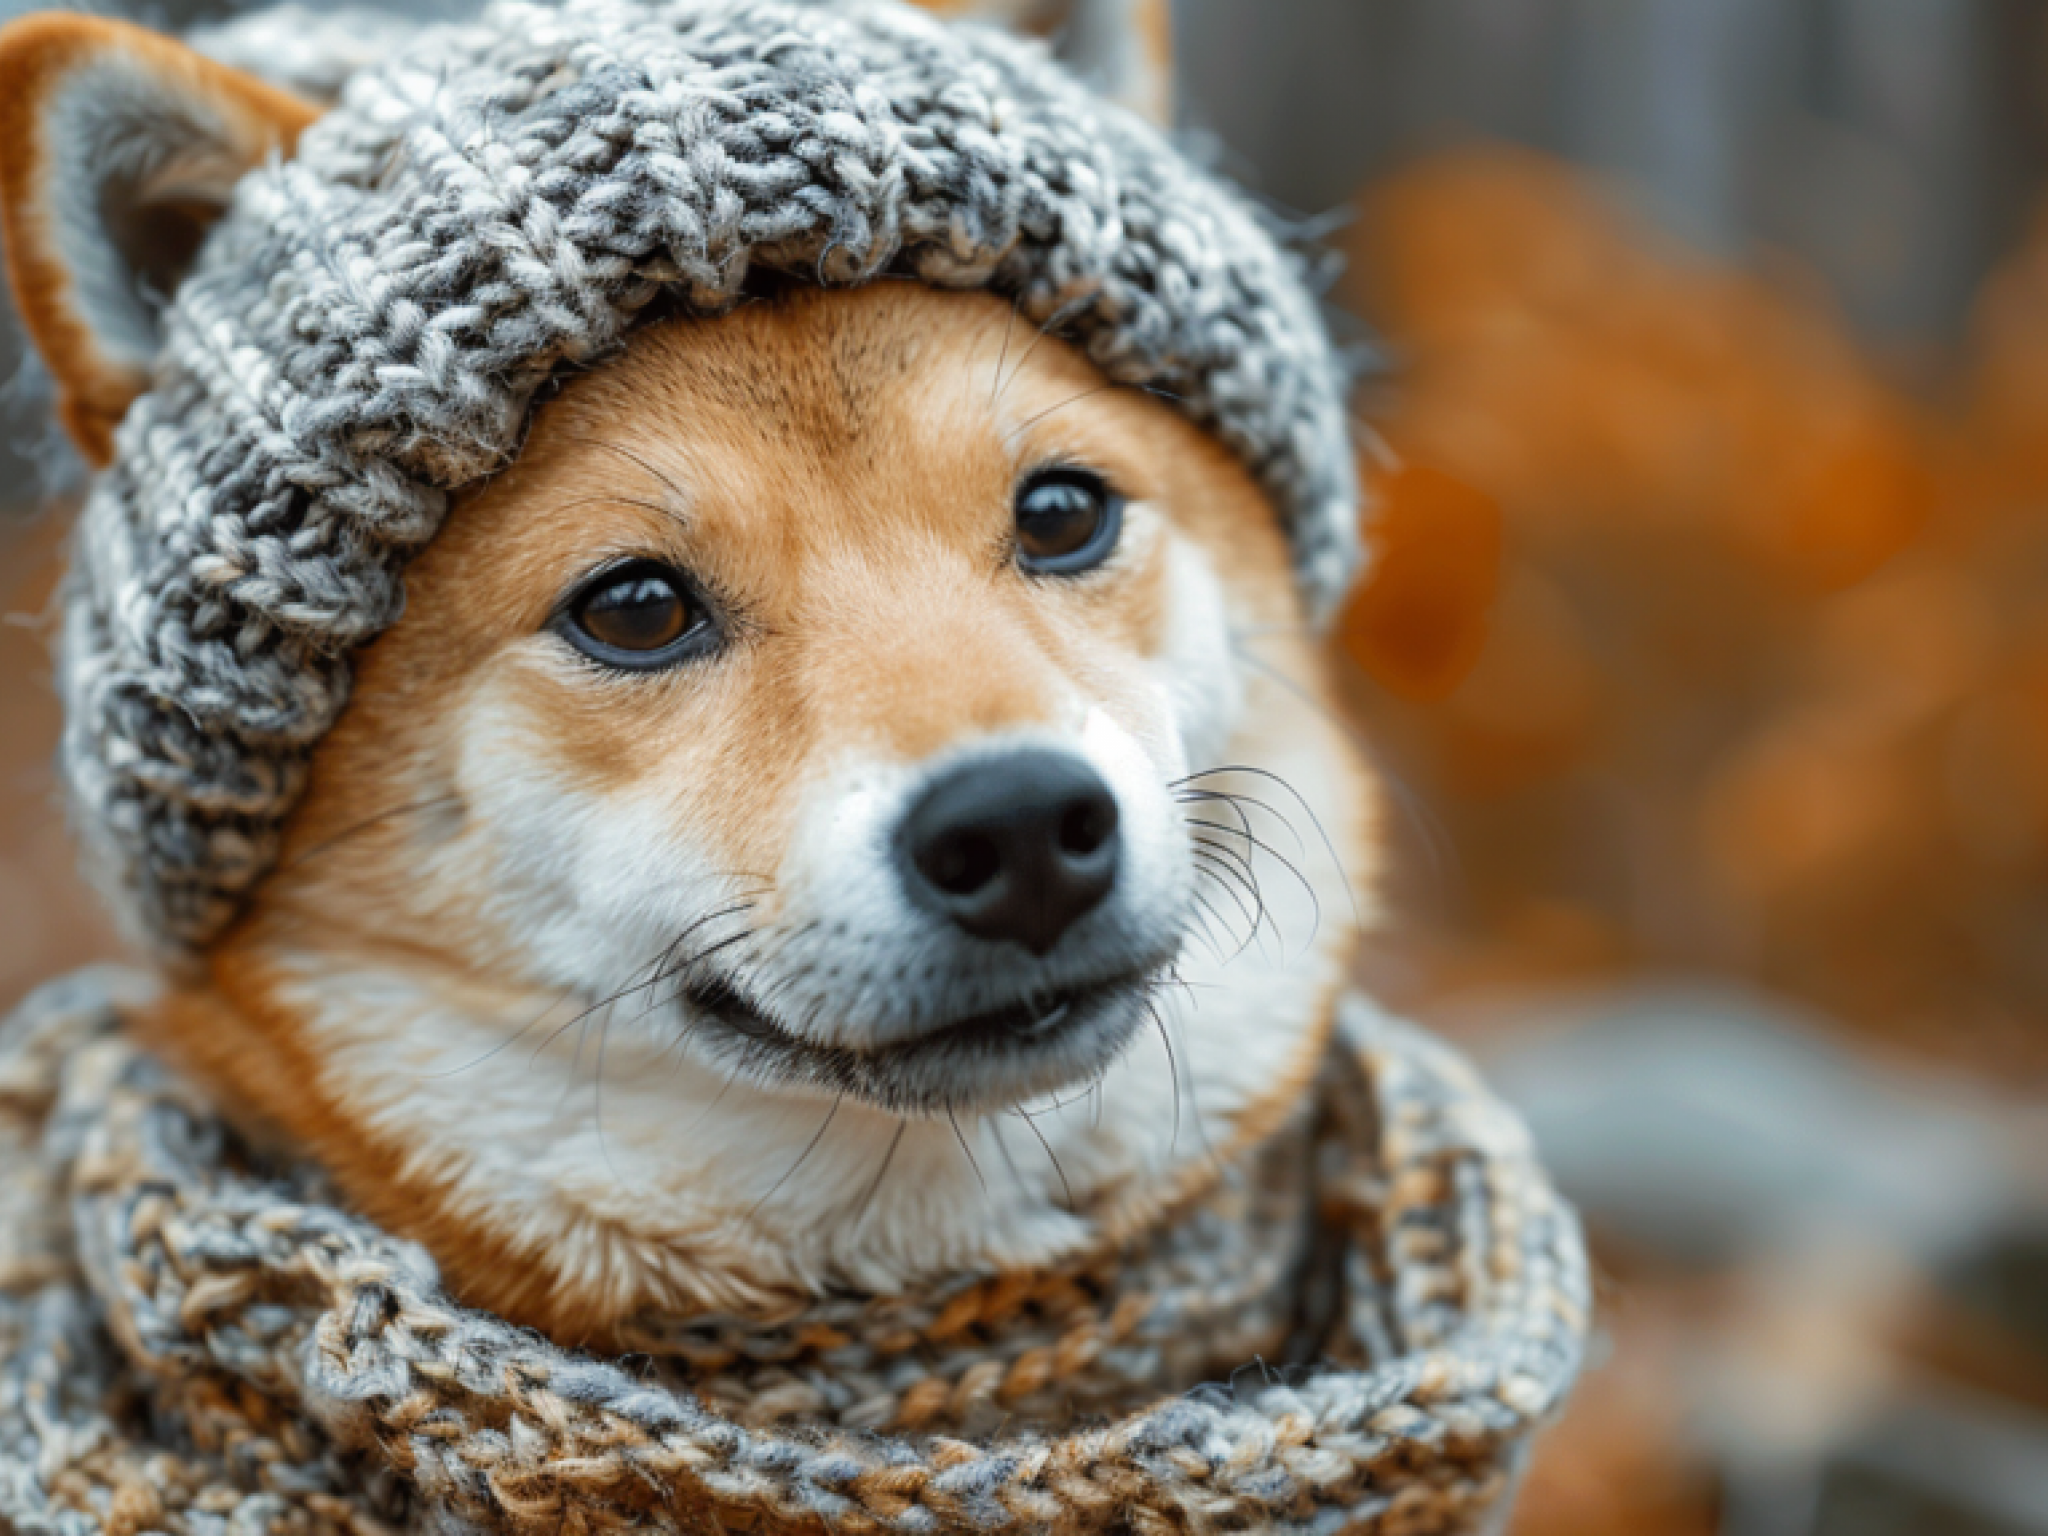  the-strongest-dog-coin-in-crypto-now-is-not-dogecoin-shiba-inu-this-goes-higher-as-long-as-btc-plays-nice-trader-vows 